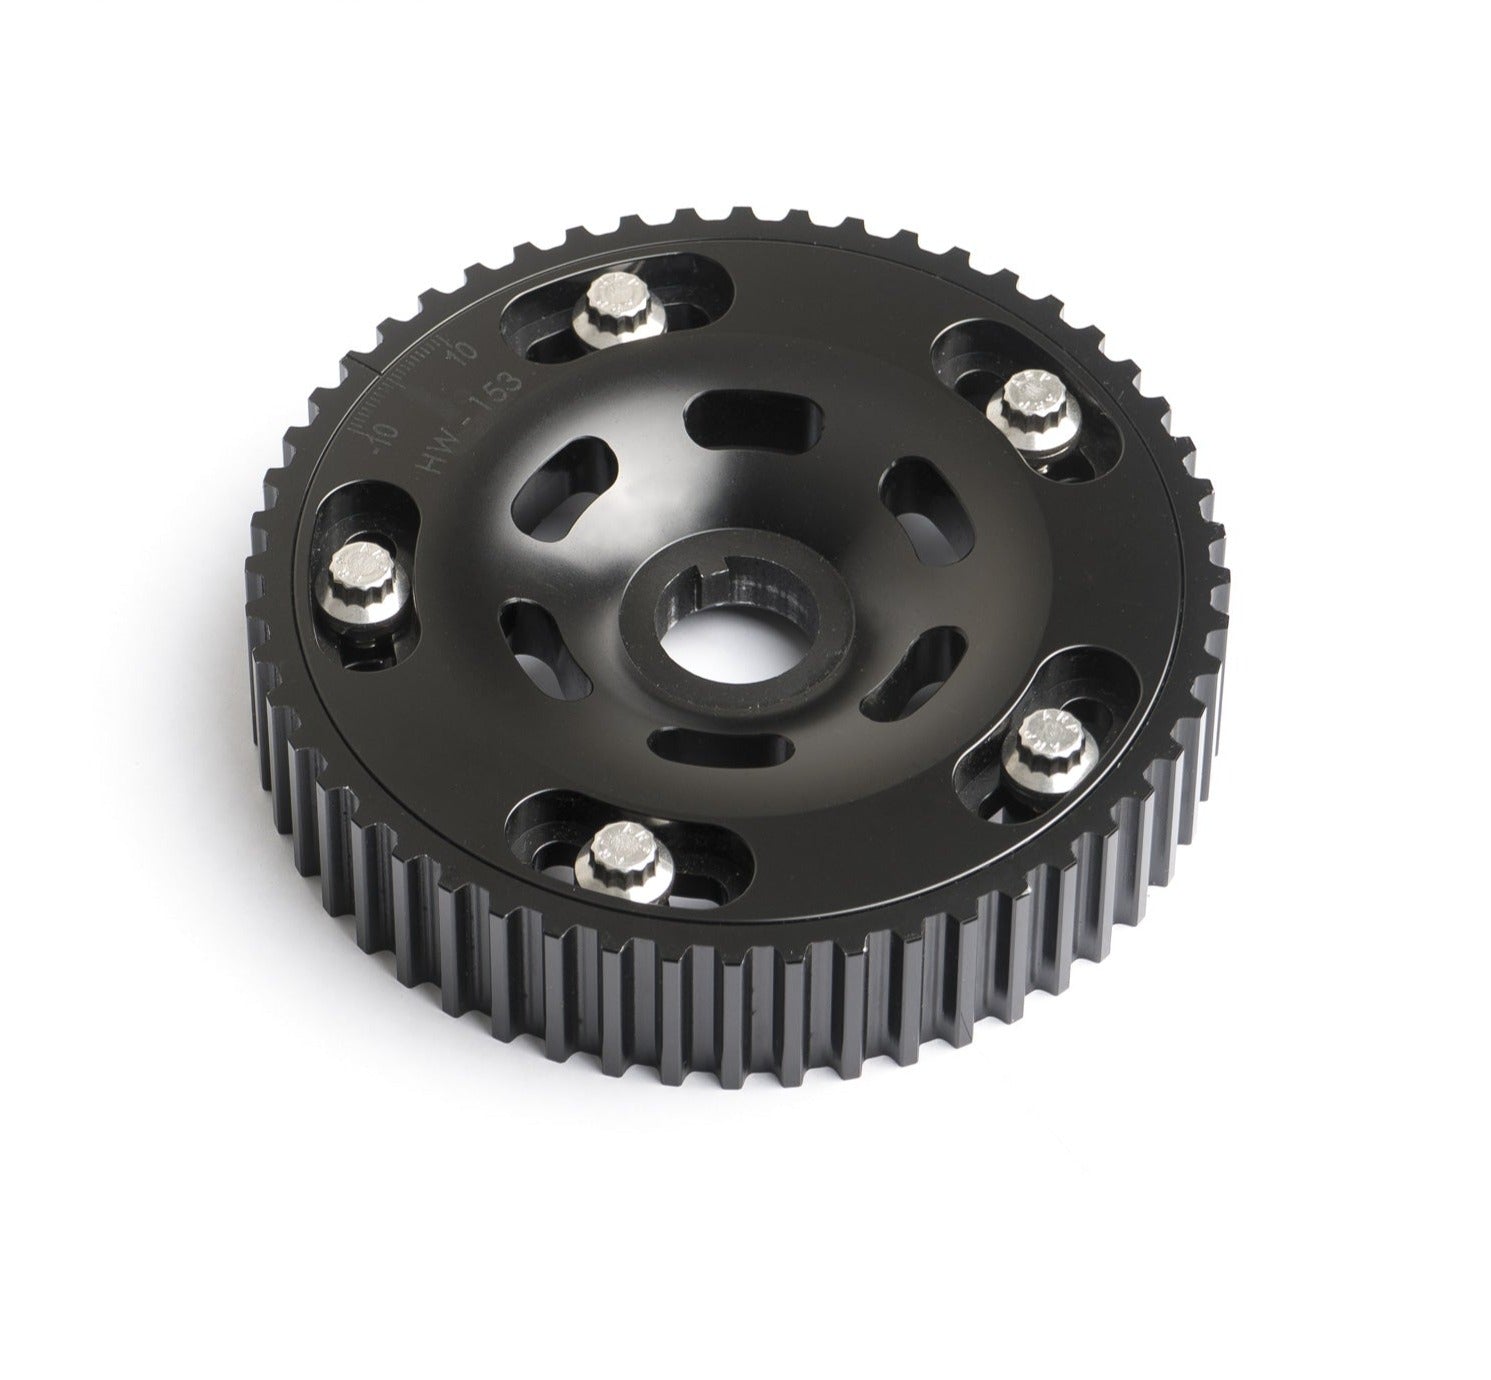 CTS Turbo Adjustable Camshaft Gear For 06A 1.8T Engines